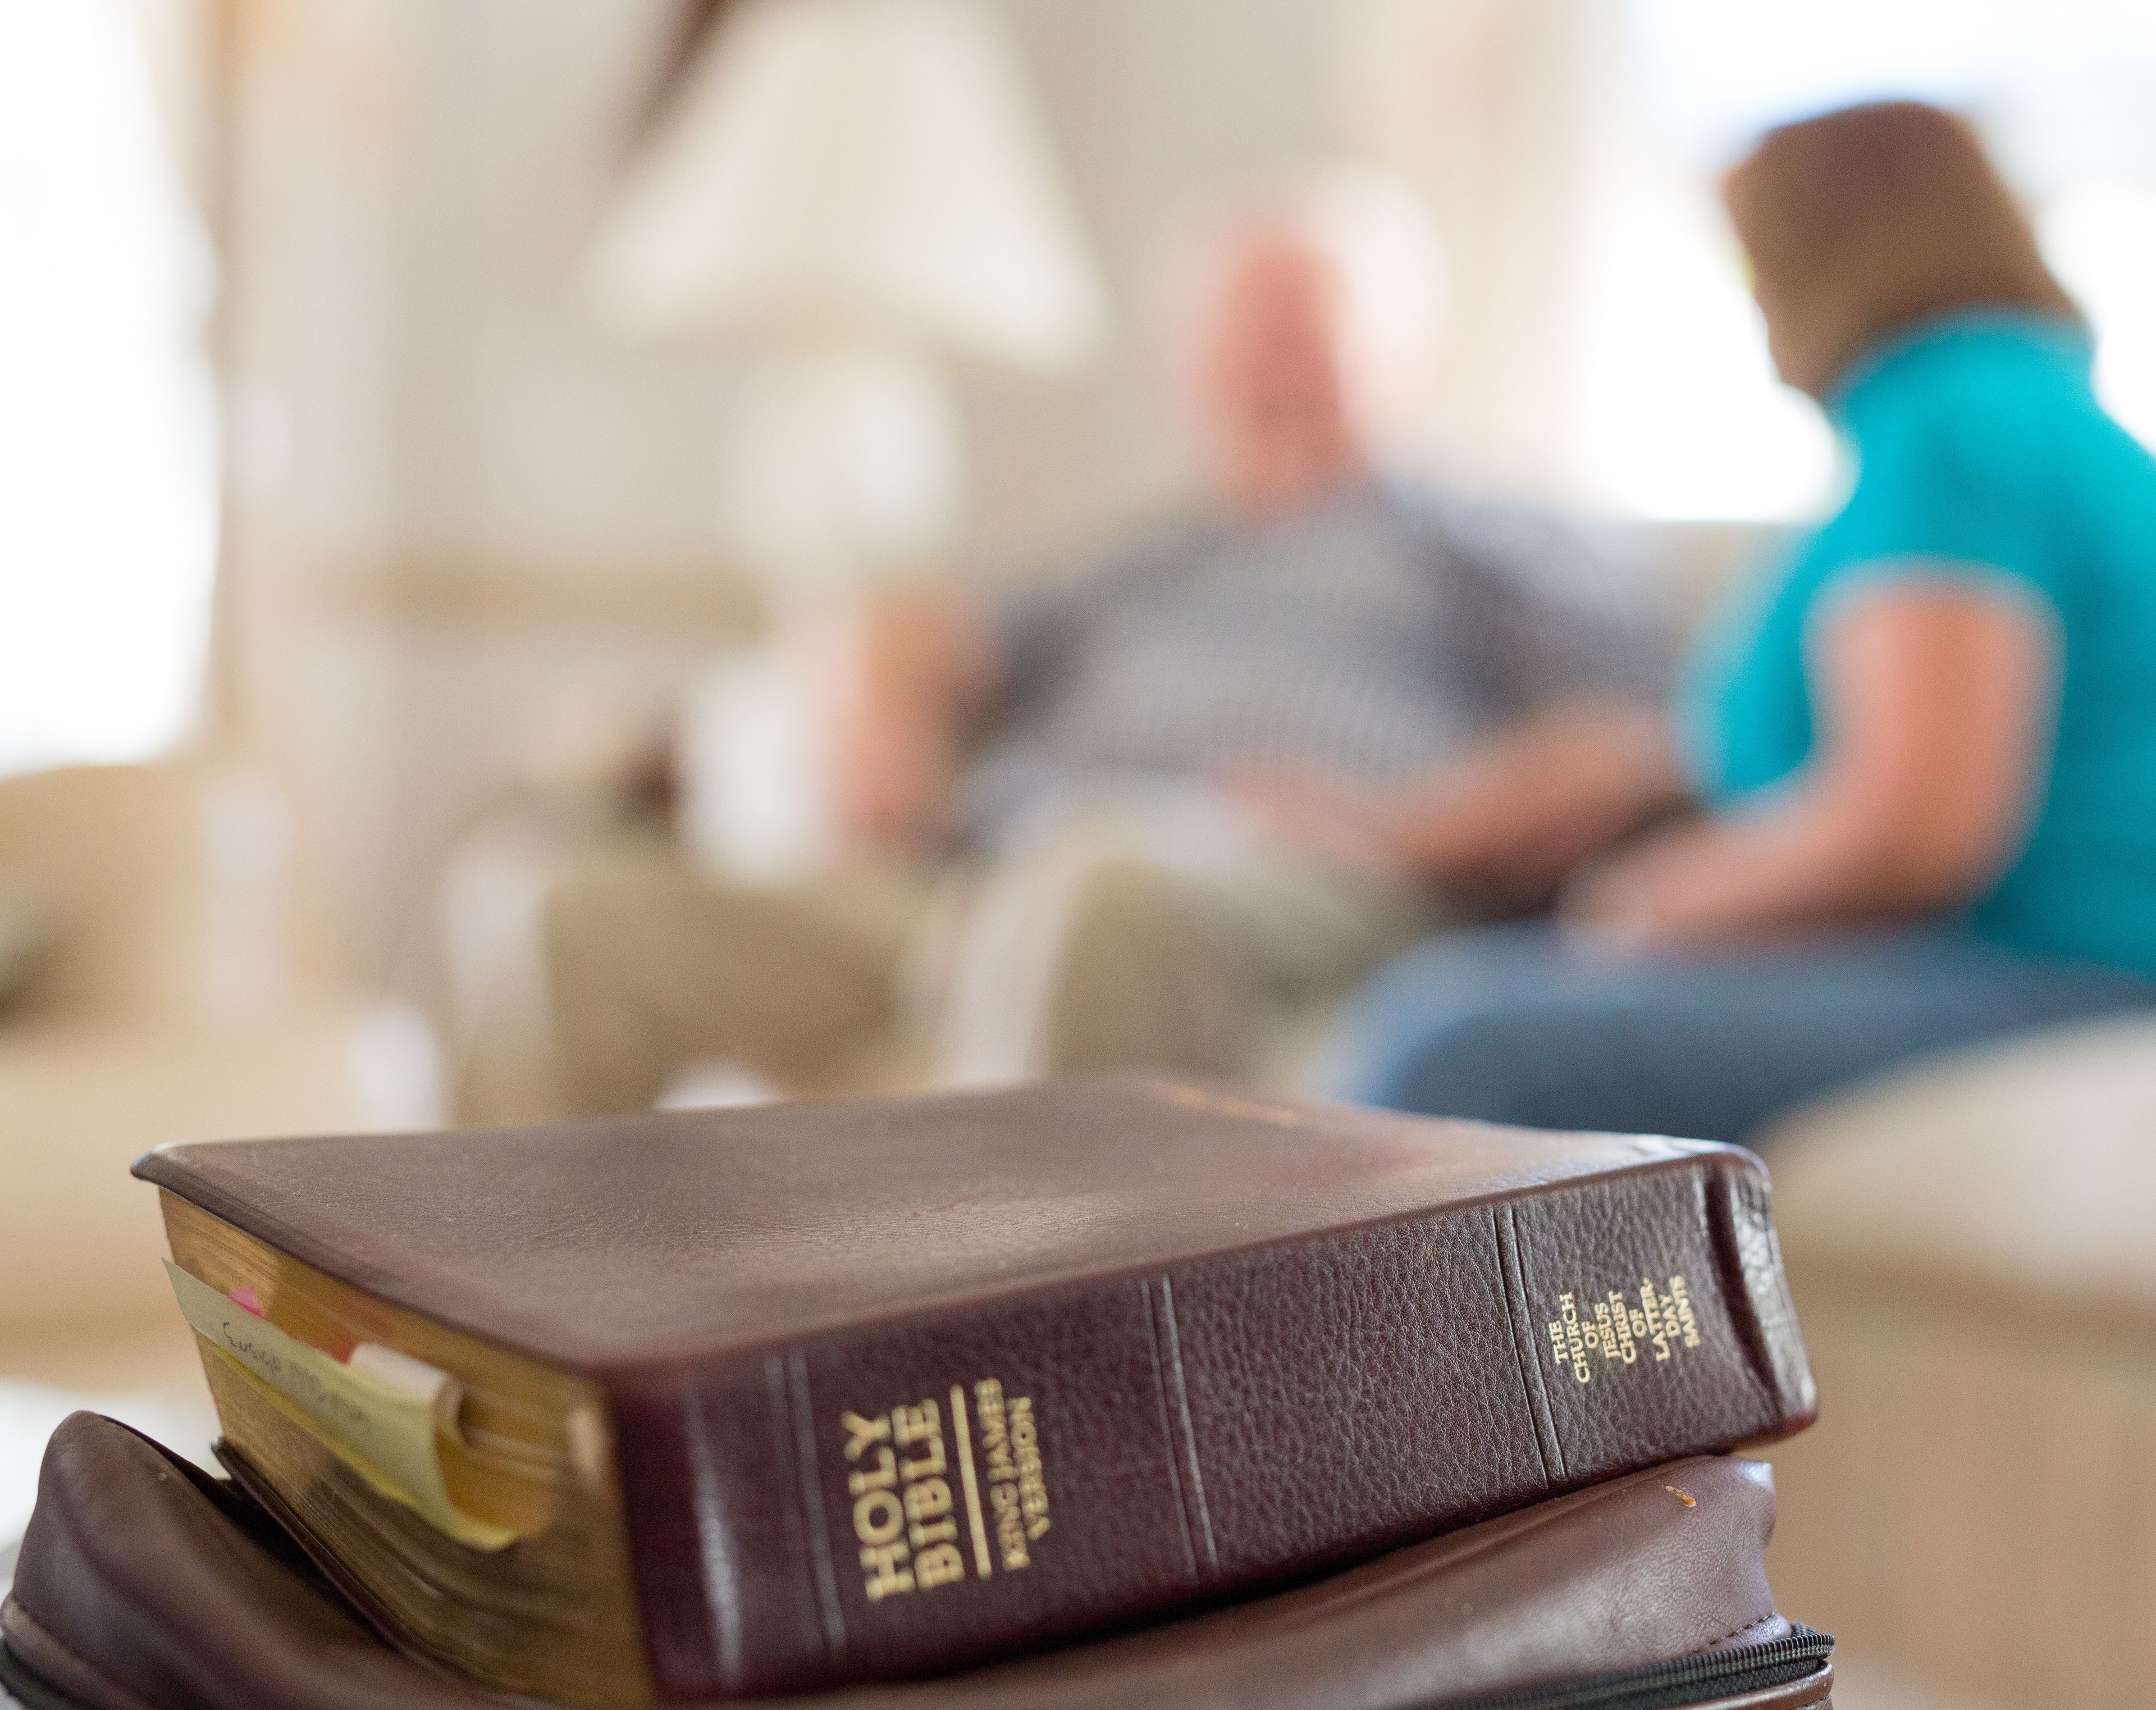 A Bible on top of a scripture case on a table, with a man and woman on a couch in the background.